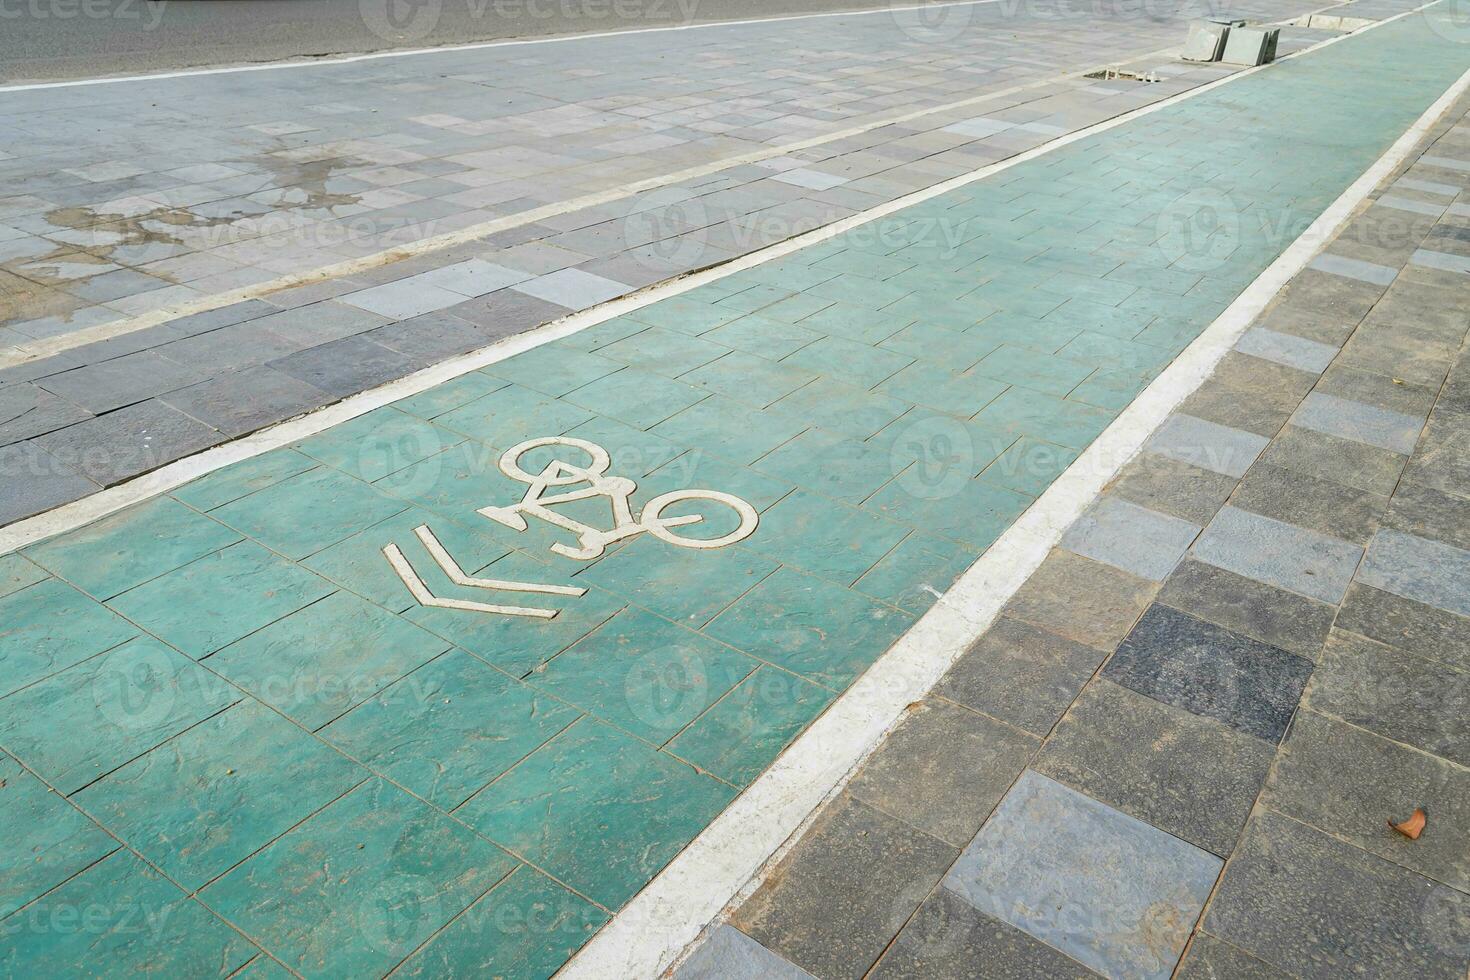 bicycle lane, traffic, city transportation and eco-friendly concept, green bicycle lane with bicycle signs photo